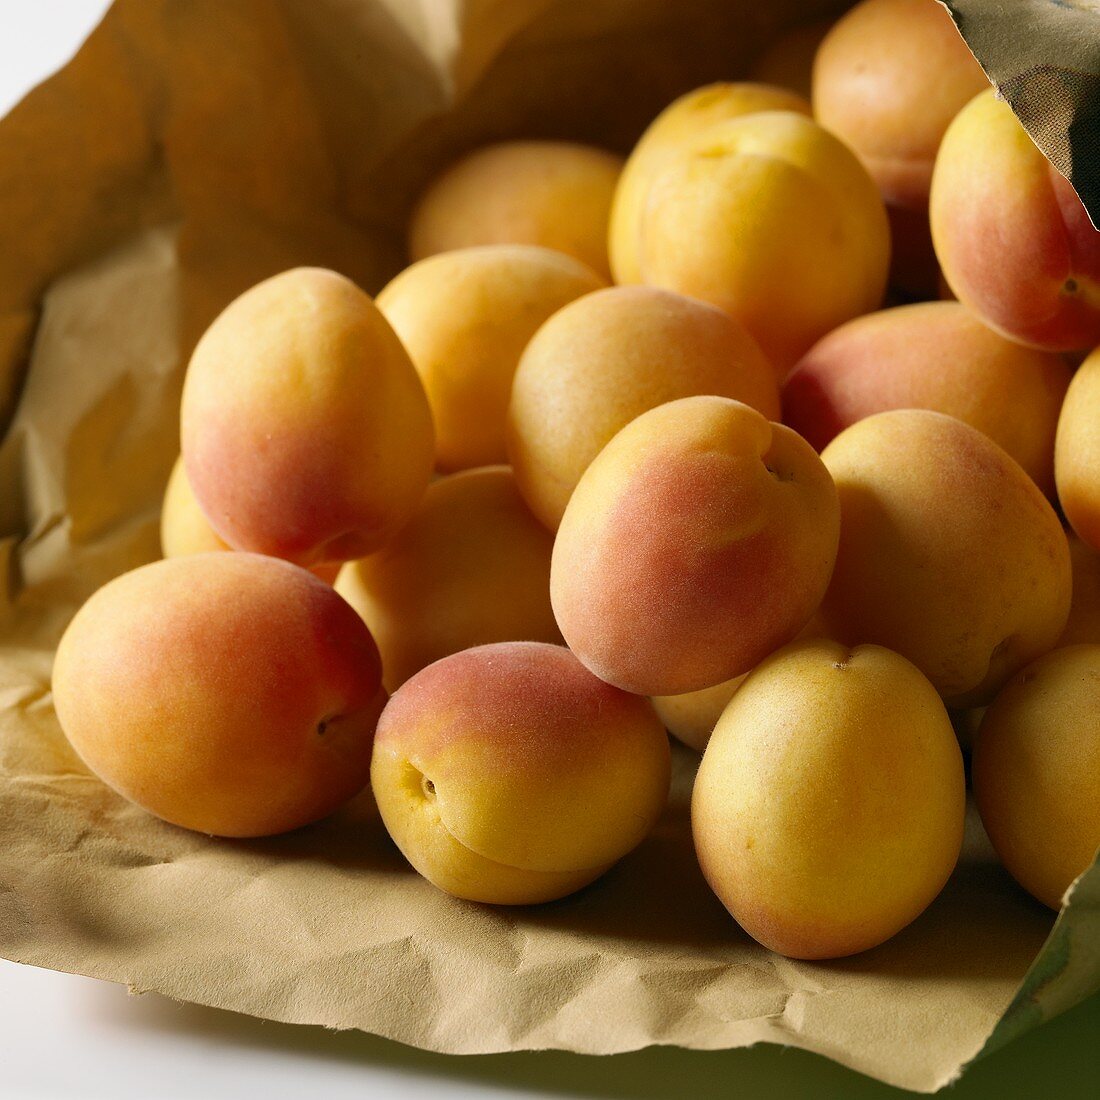 Apricots in a paper bag